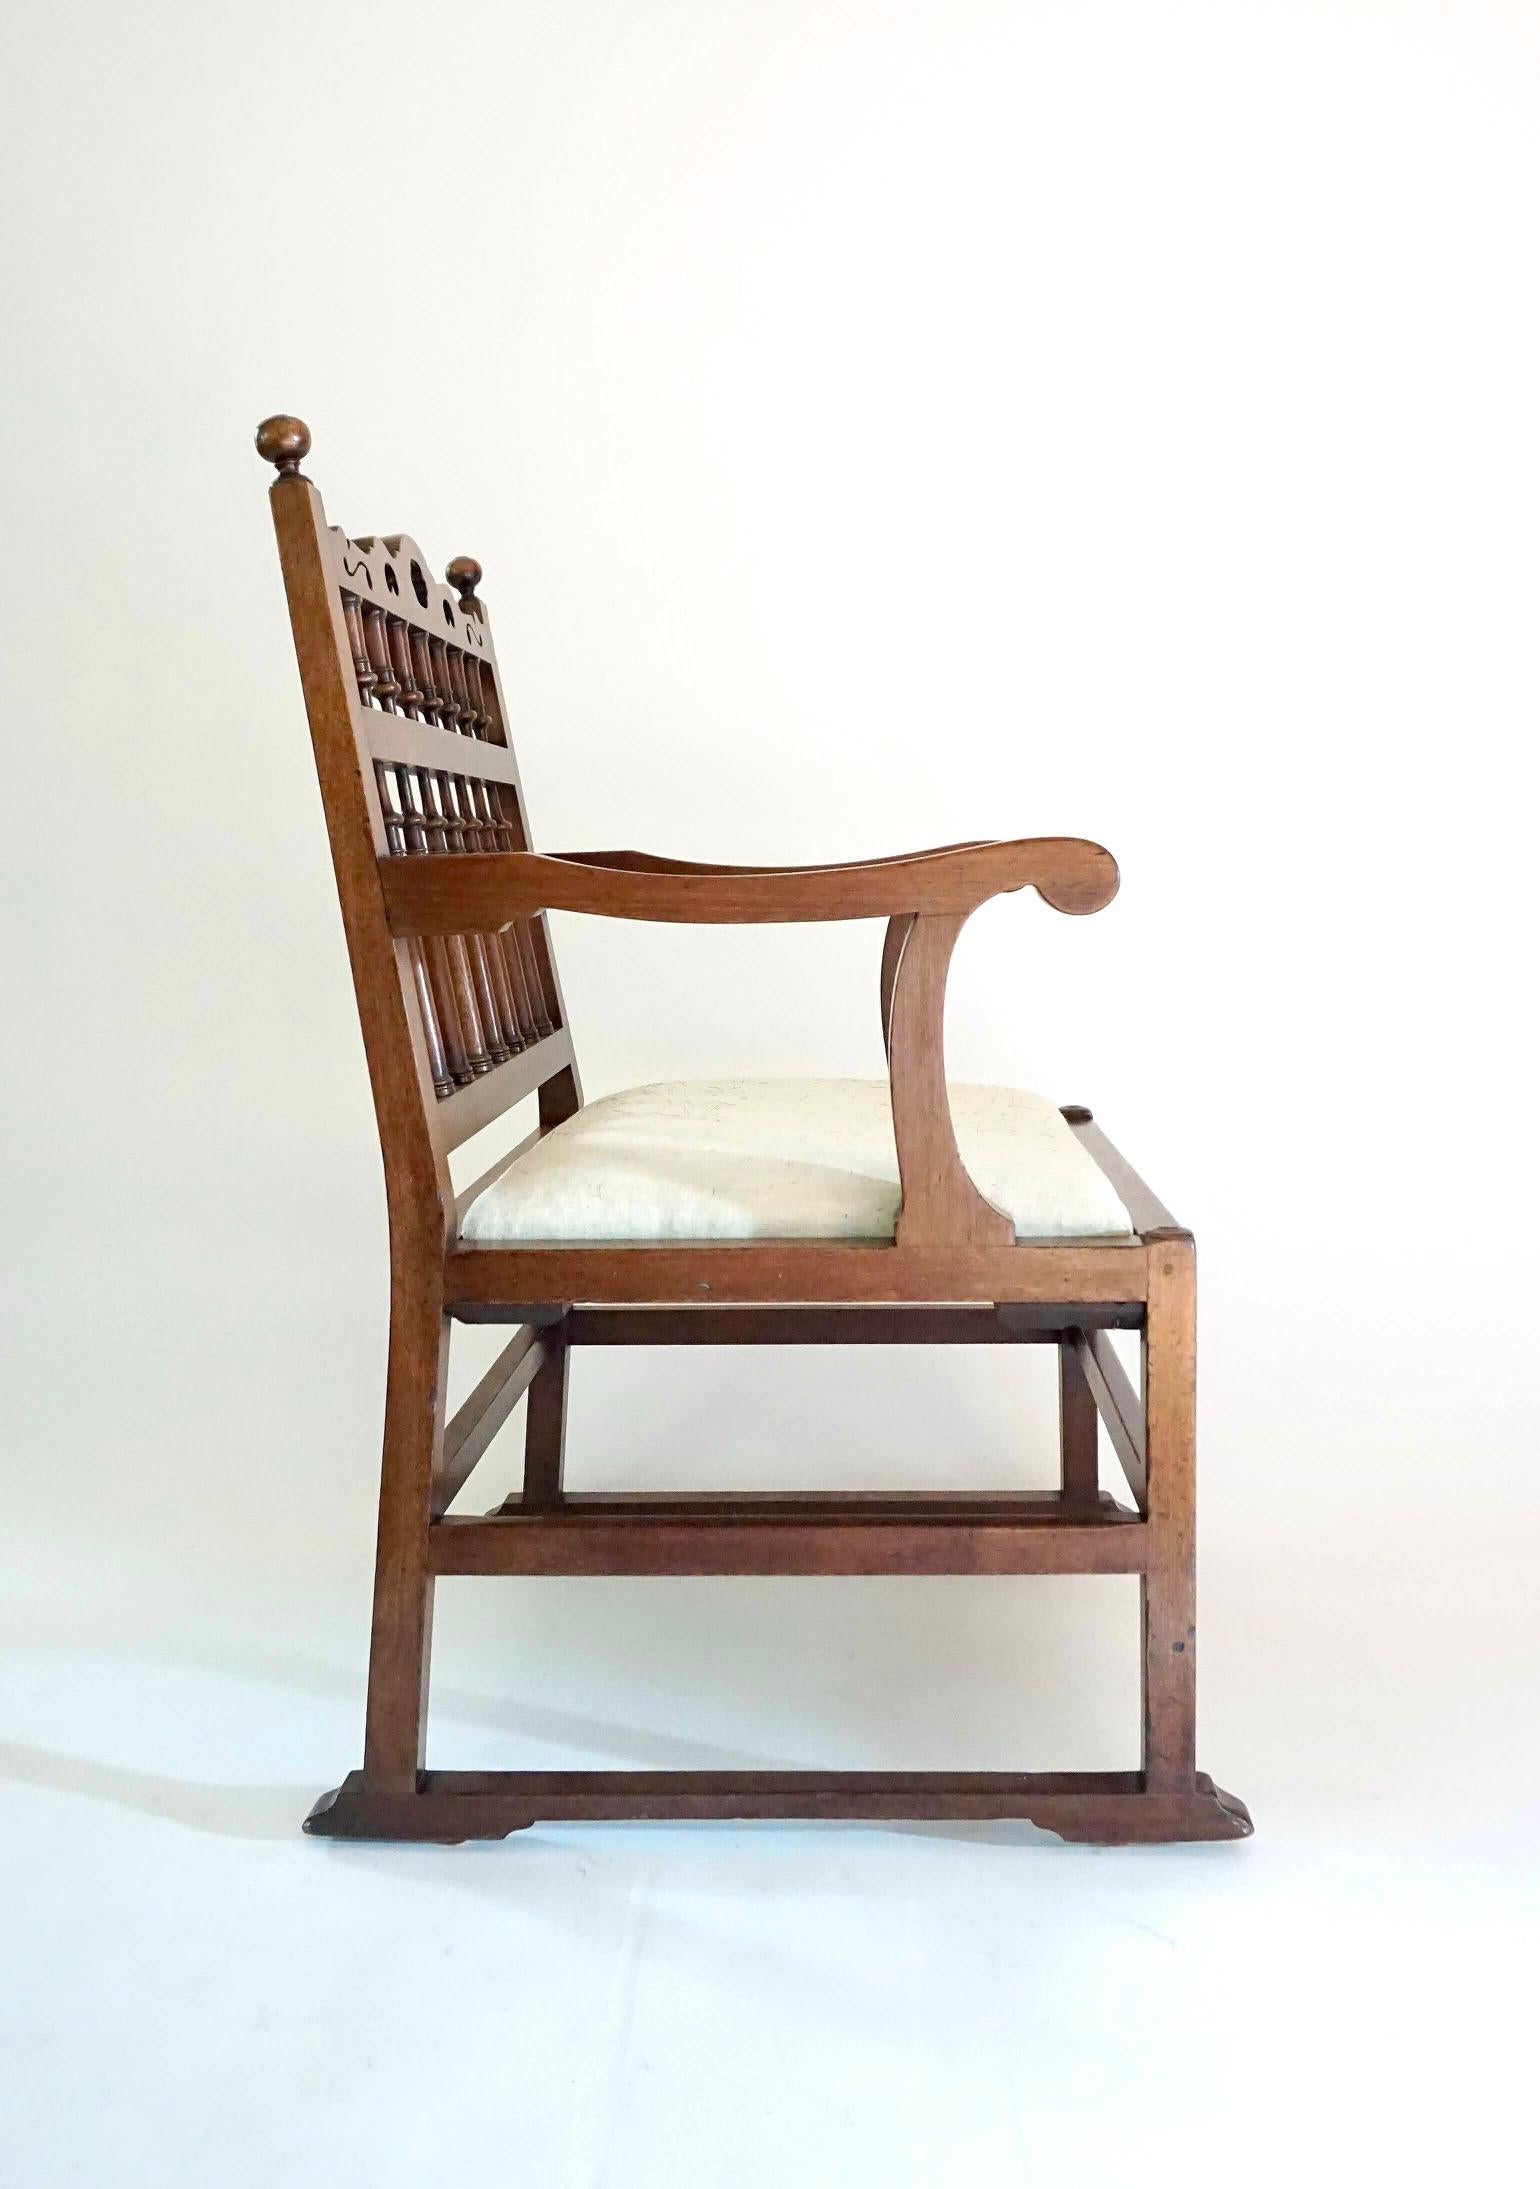 Hand-Carved A Pair of Northern English Spindle-Back Arm Chairs, circa 1780 For Sale